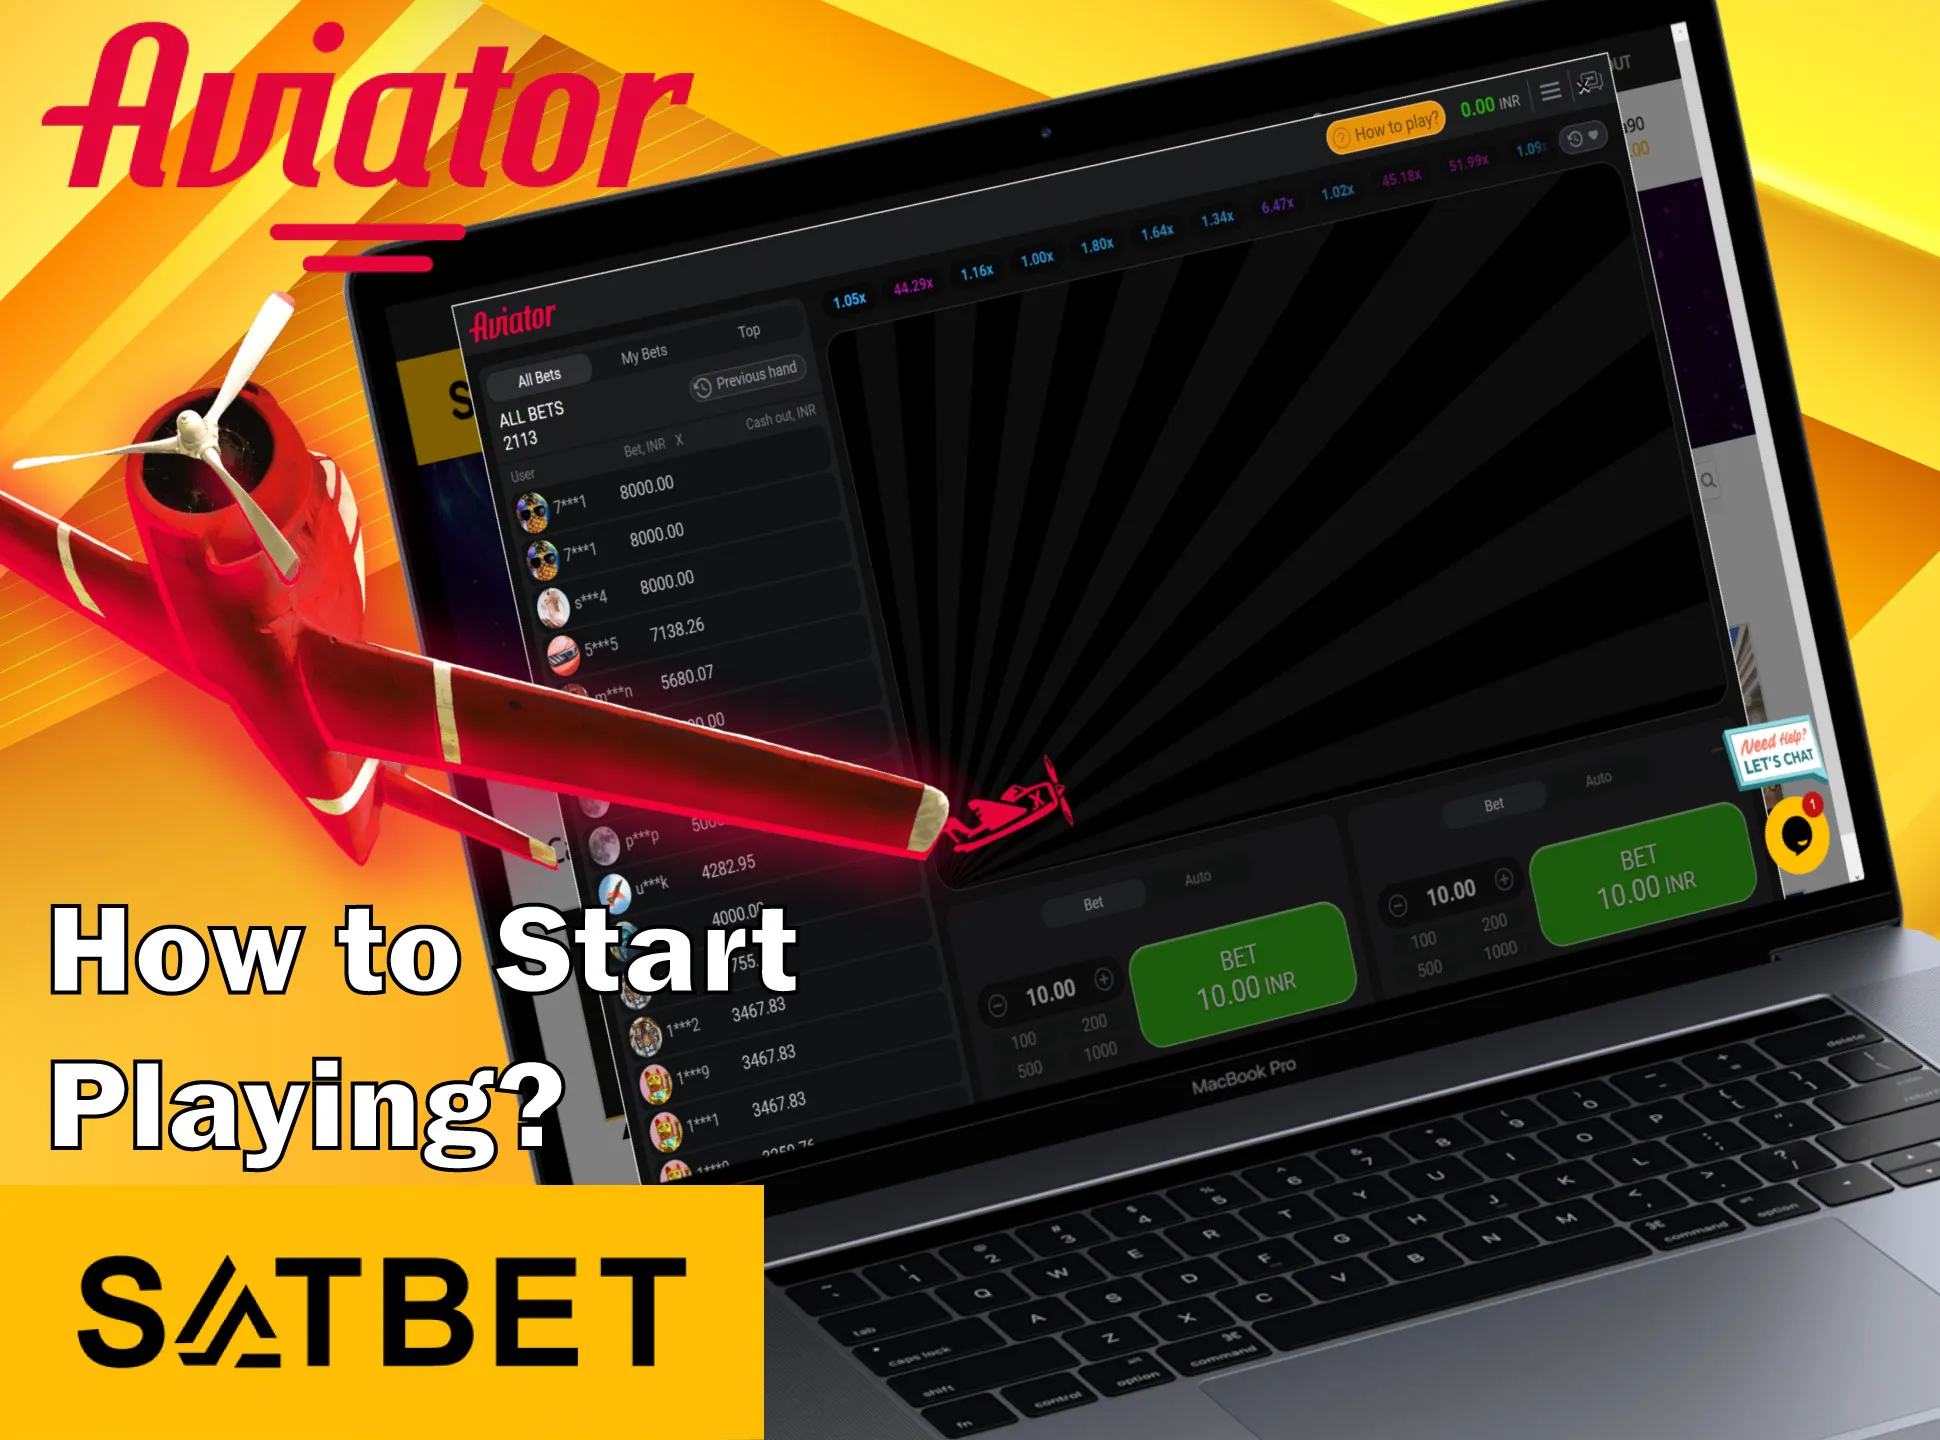 Start playing the Aviator game at the Satbet.